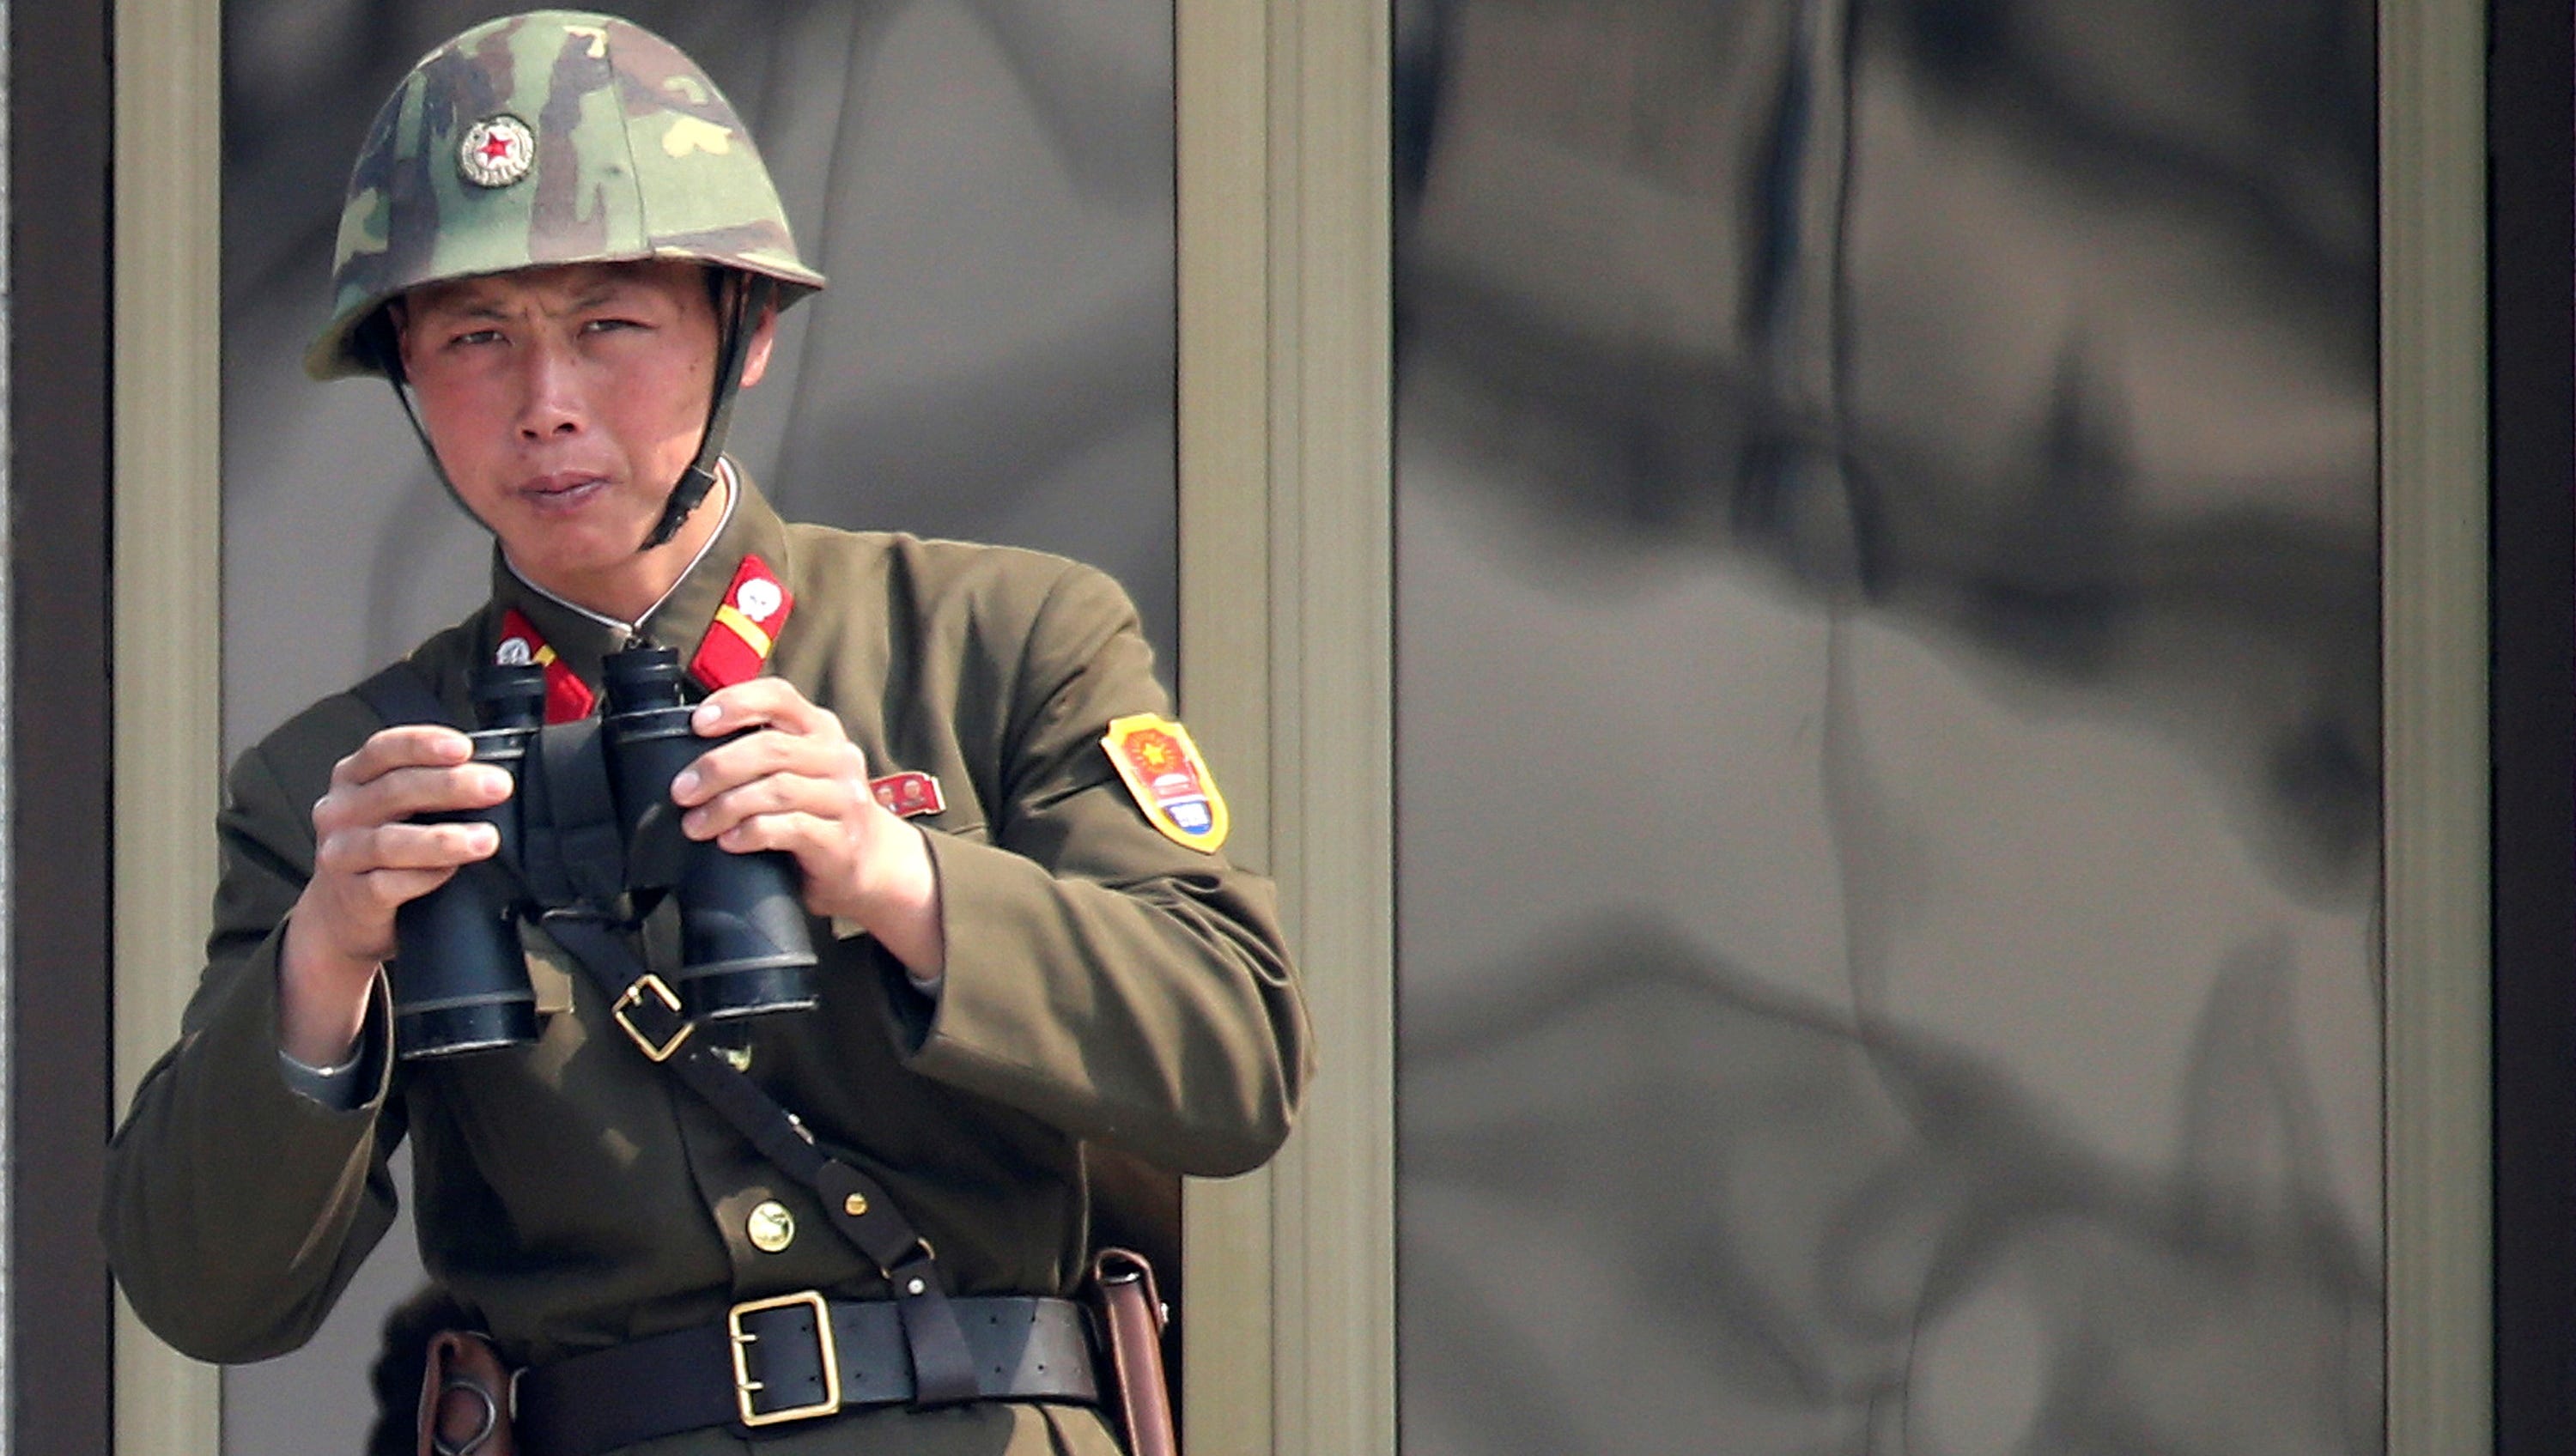 20 facts about North Korea